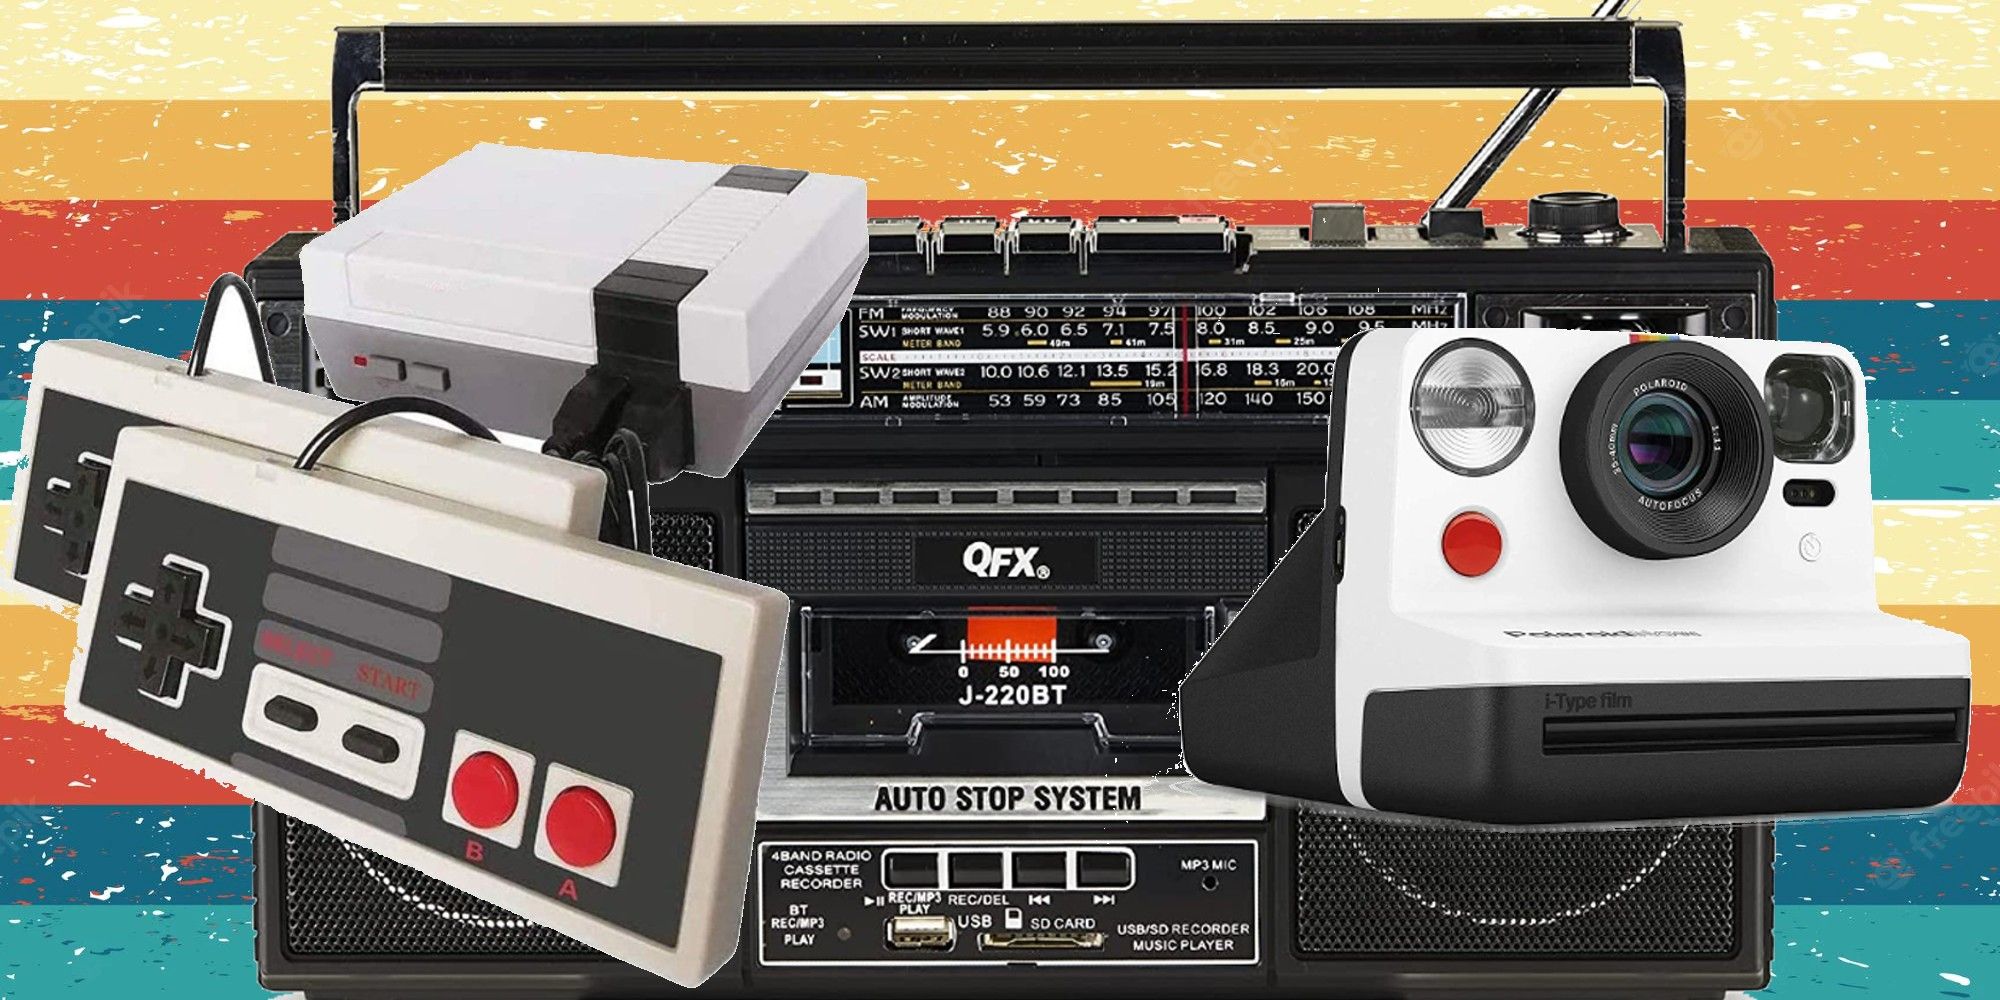 Collage of QFX Boombox Retro Console Game and Polaroid i-Type Instant Camera Amazon products